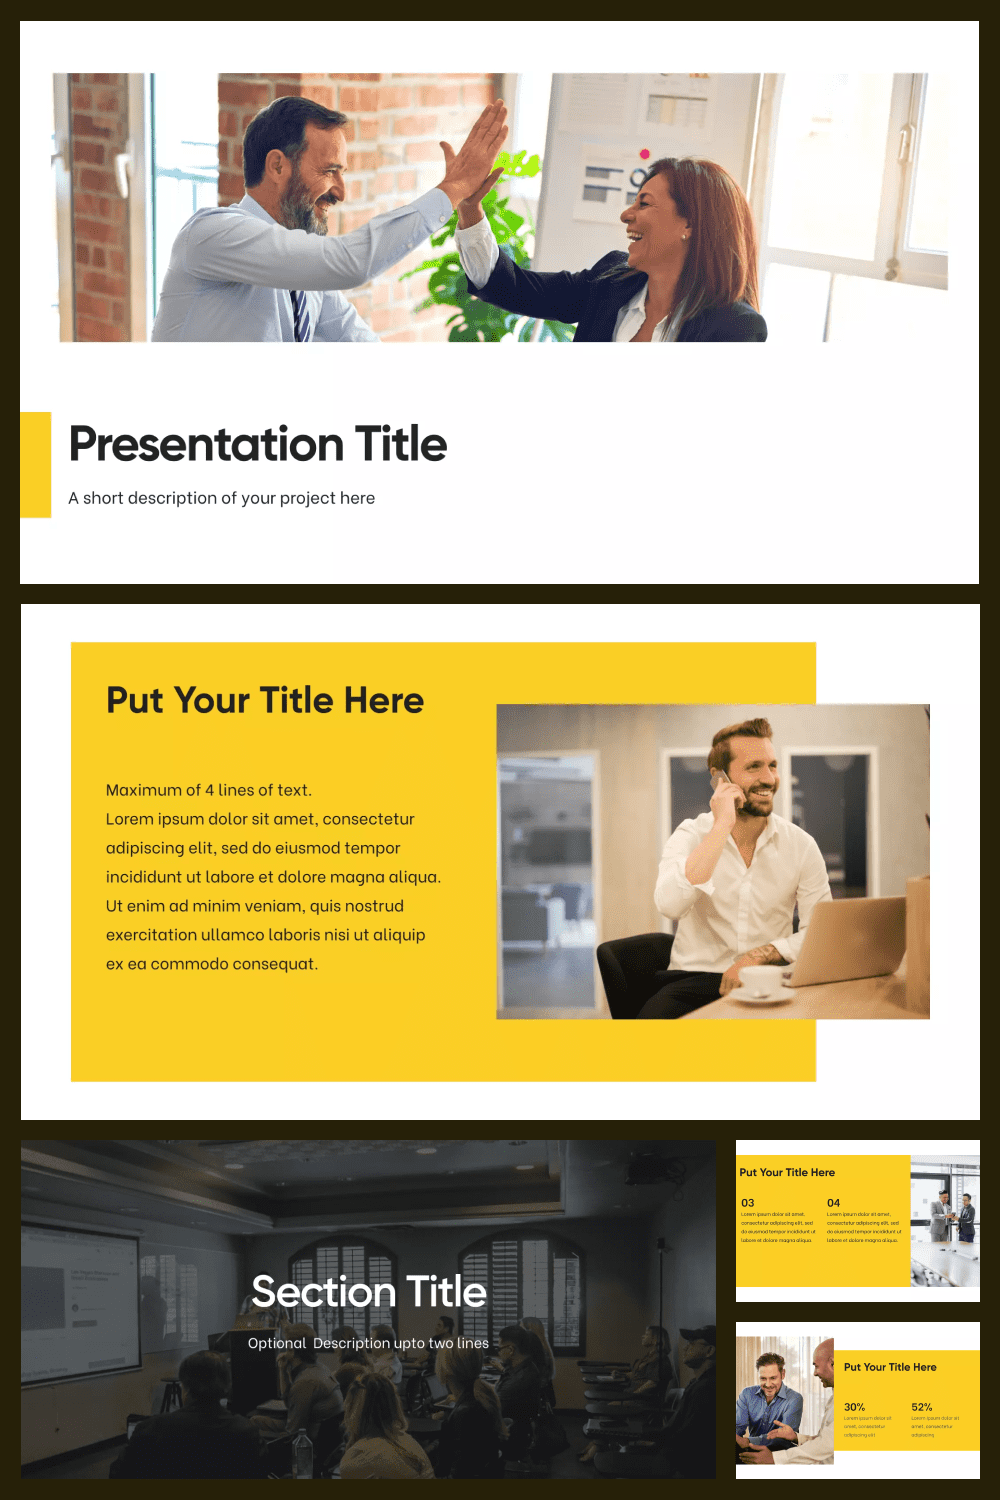 Collage of template pages with white background, yellow backing and close-ups of people.